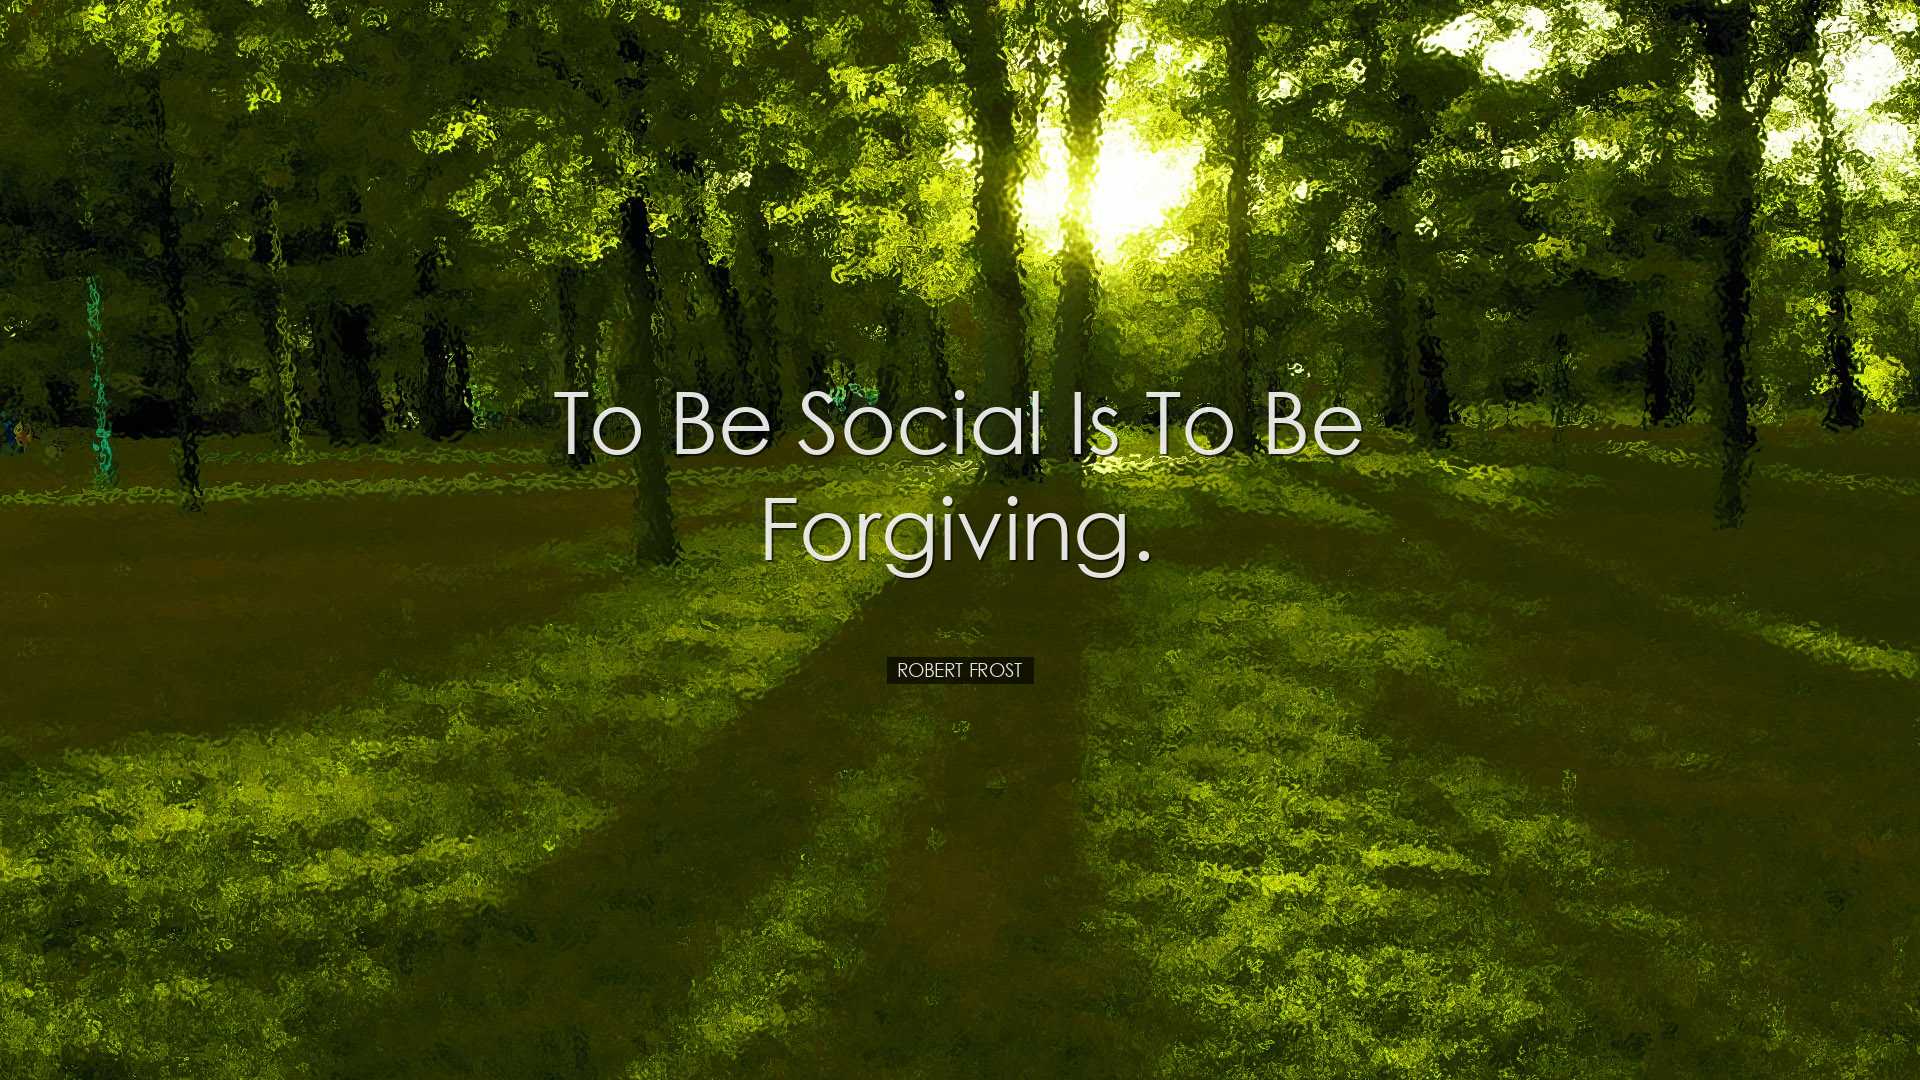 To be social is to be forgiving. - Robert Frost